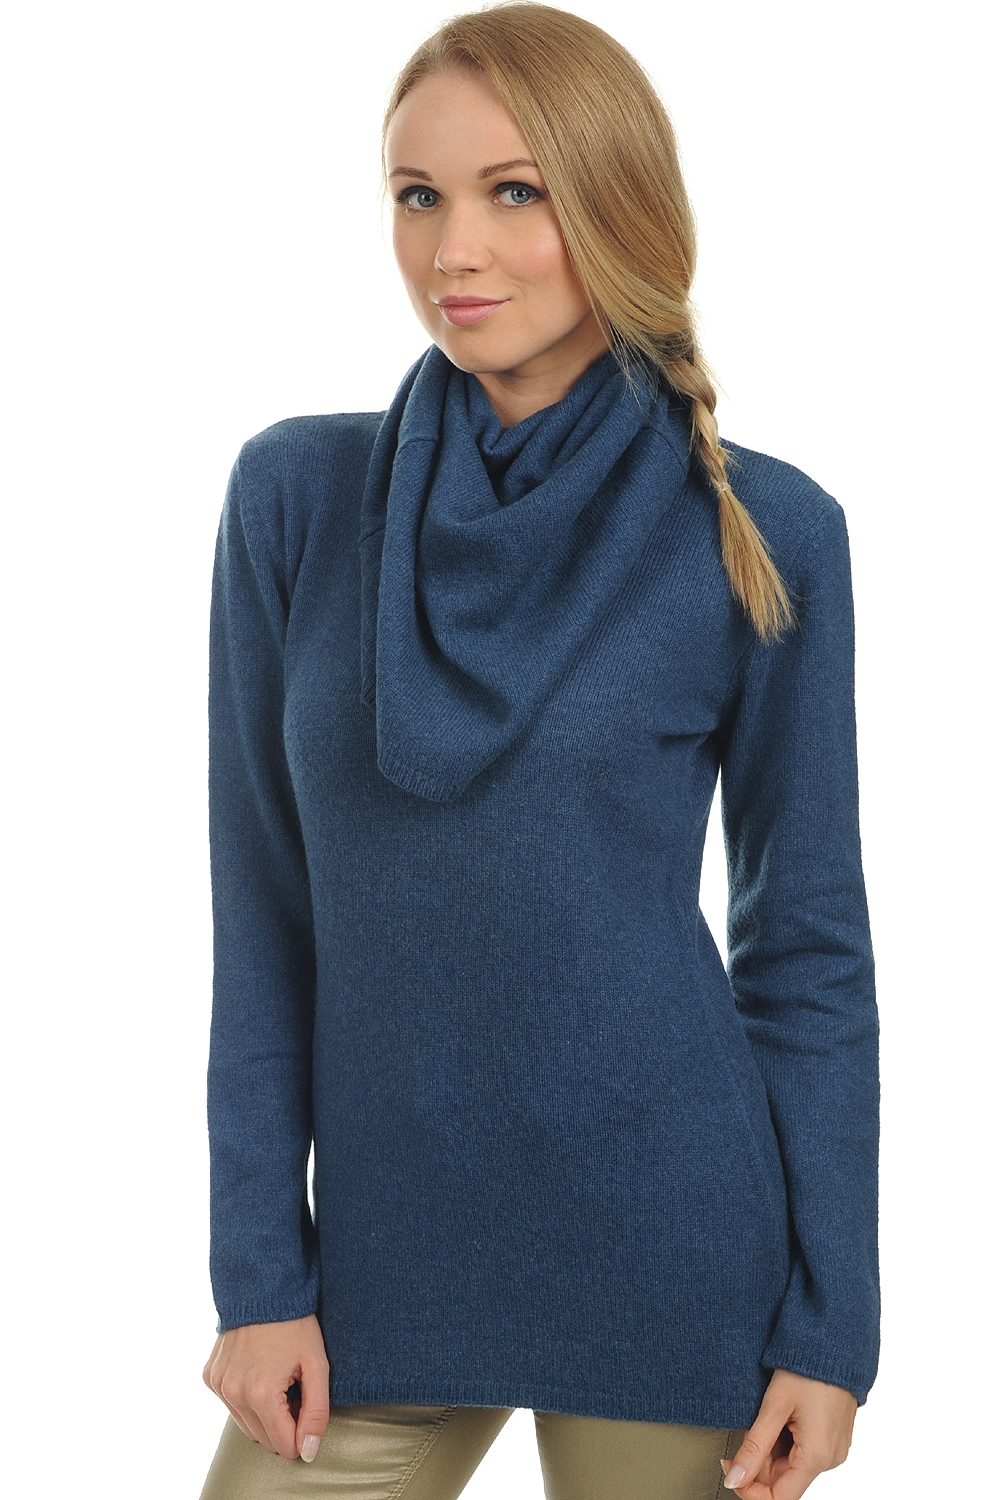 Yak pull femme col roule yness bleu stellaire 4xl